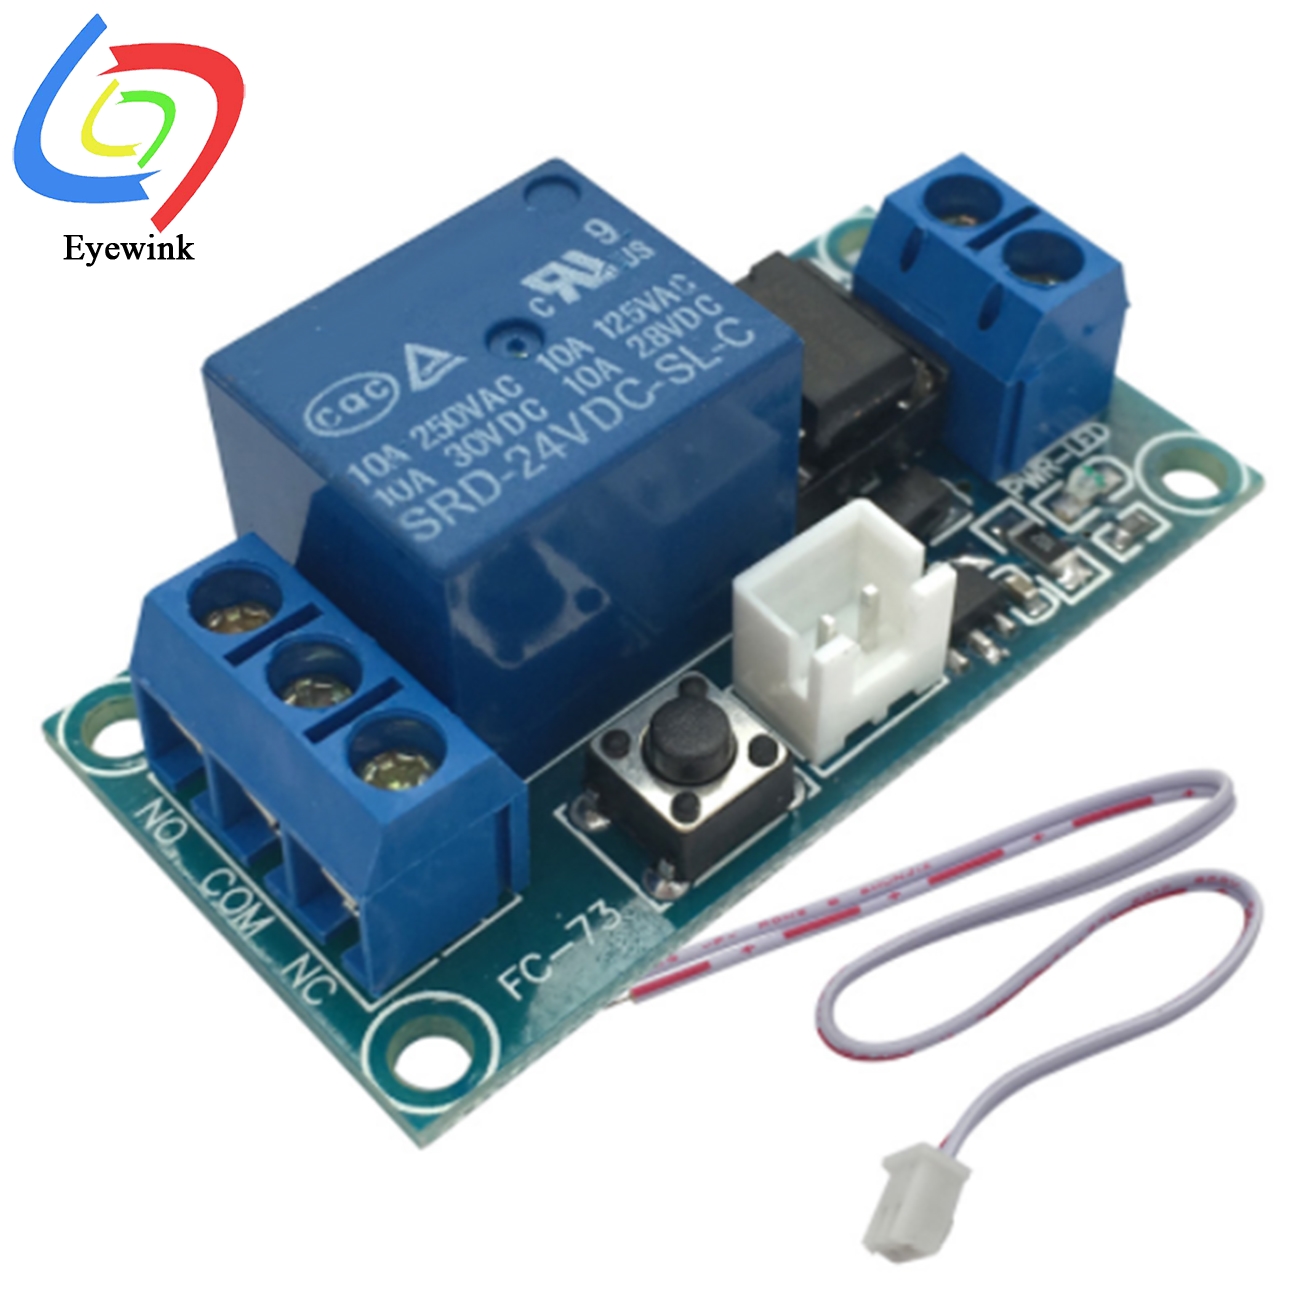 1 Channel 5V/12V/24V Latching Self-locking Relay Module With Touch Bistable Switch MCU Control 1 Channel Relay With Trigger Line